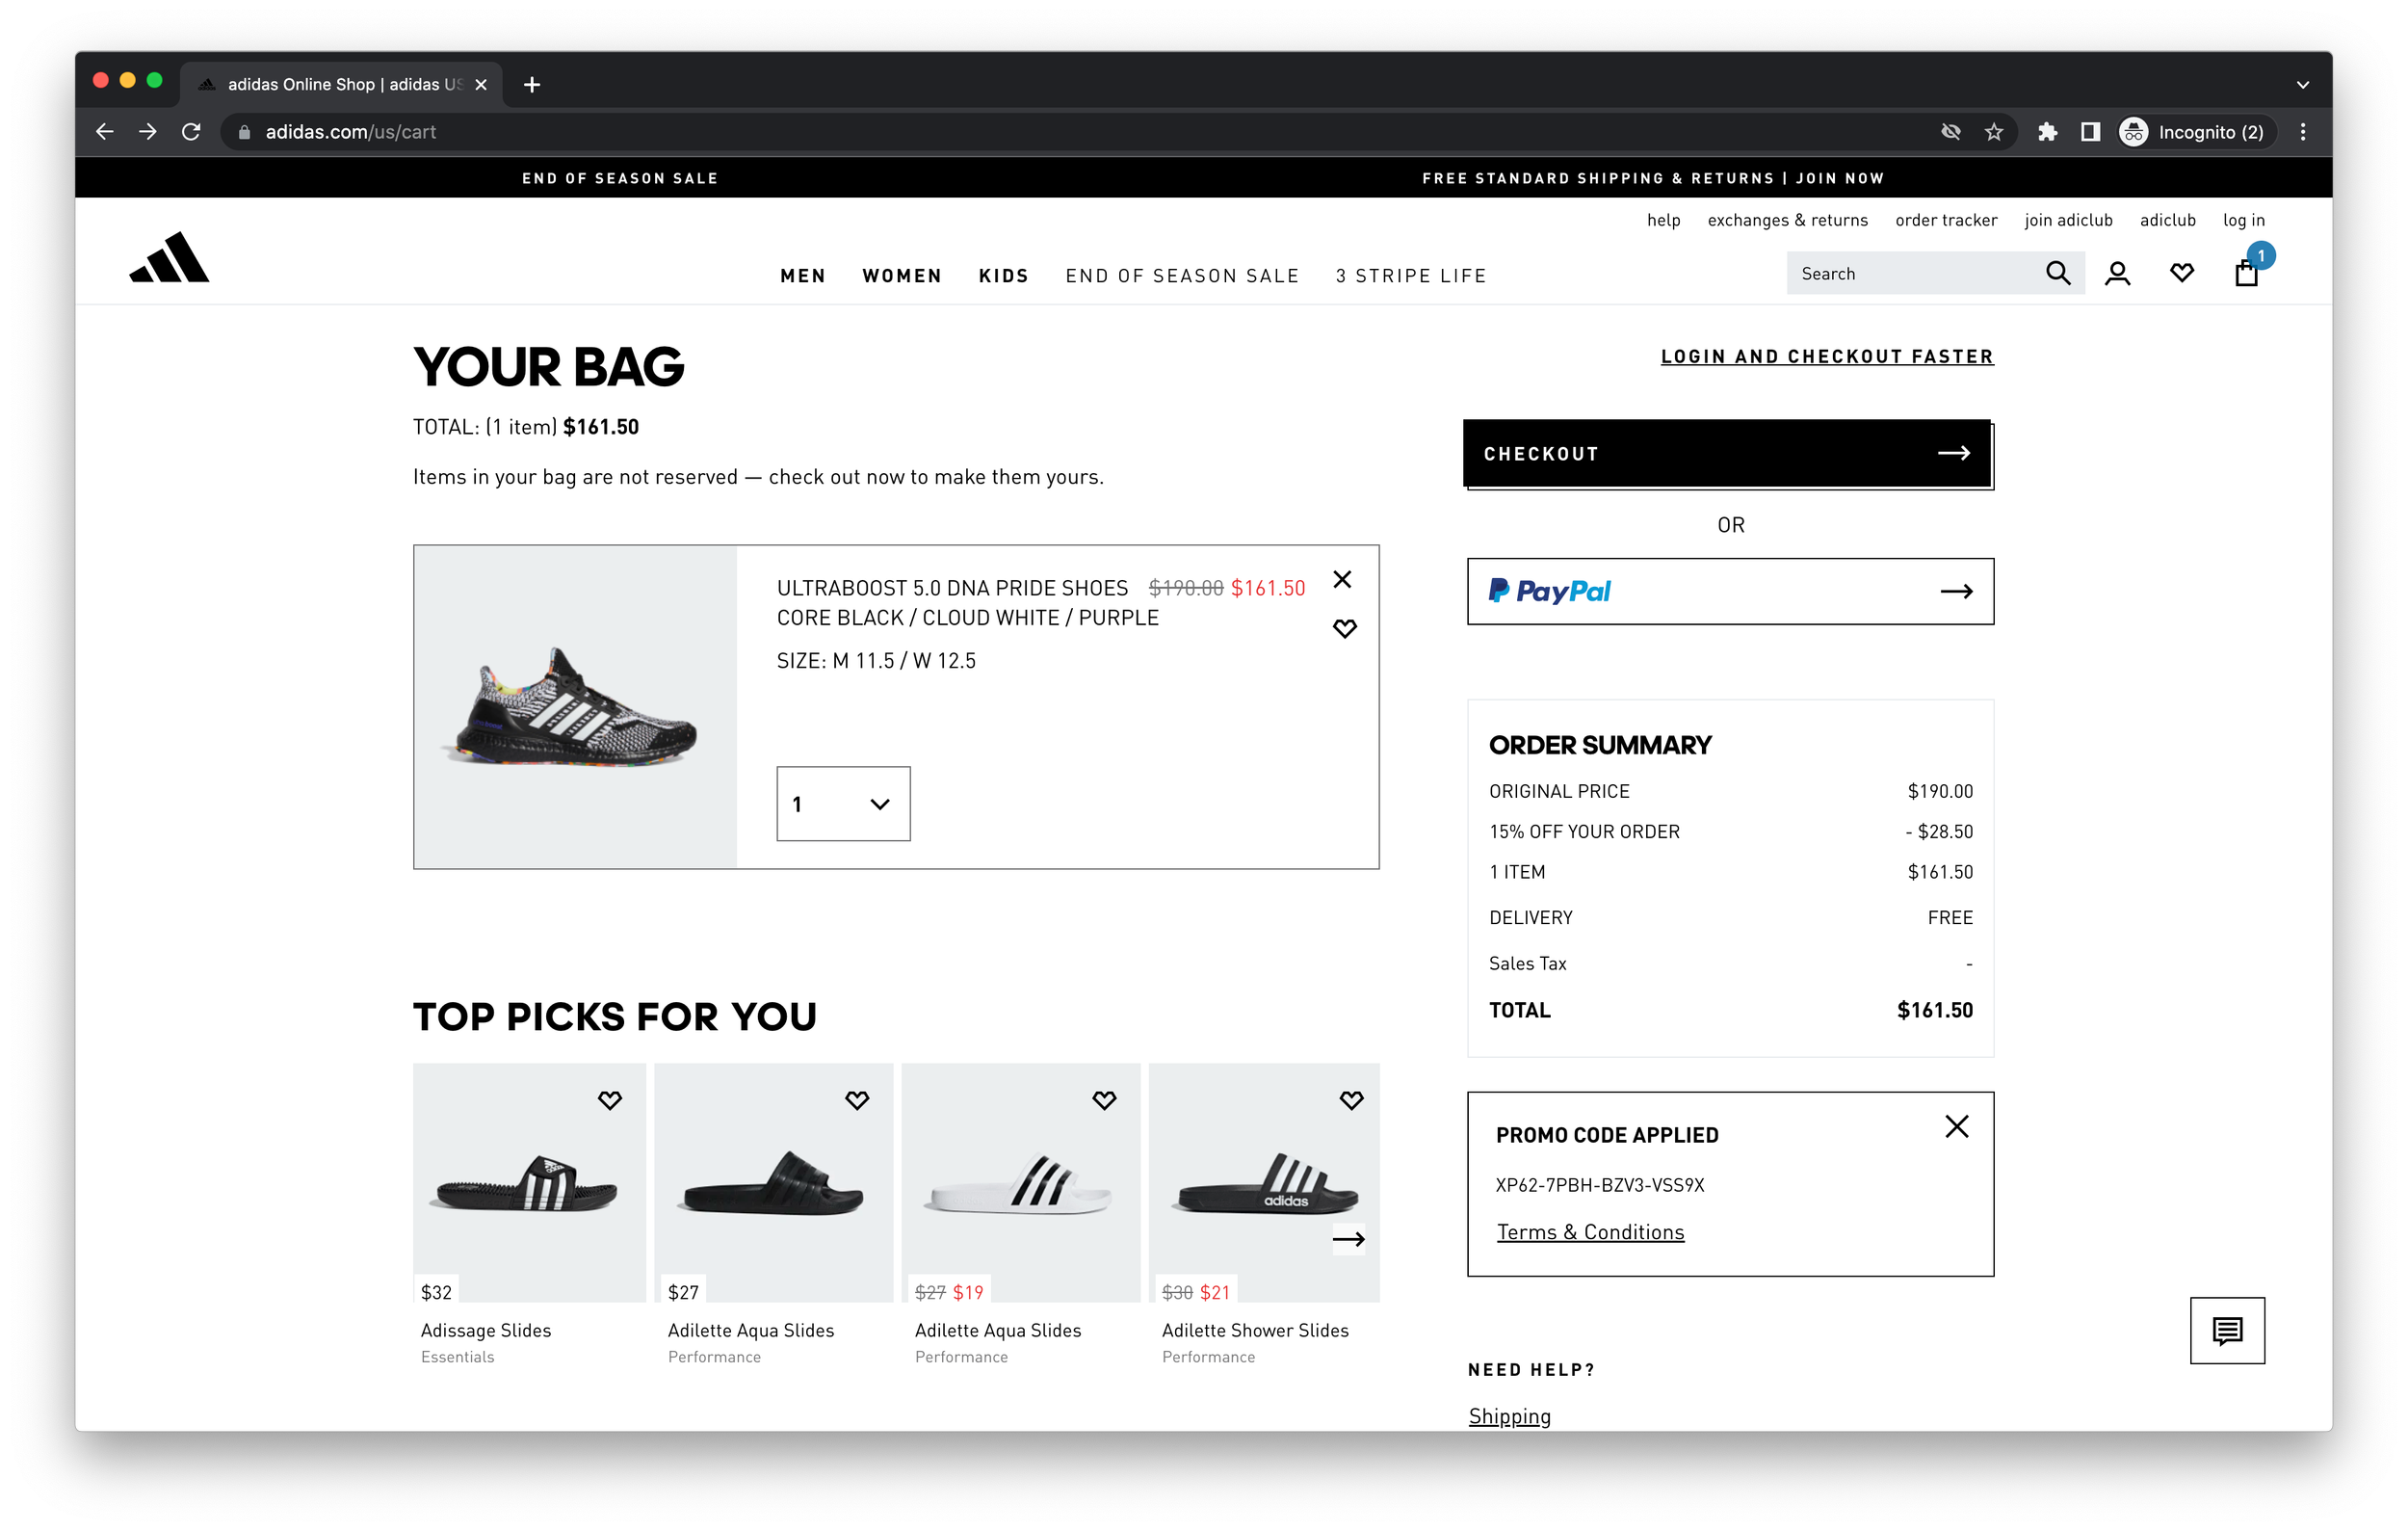 Example of Promo Code Abuse on Adidas